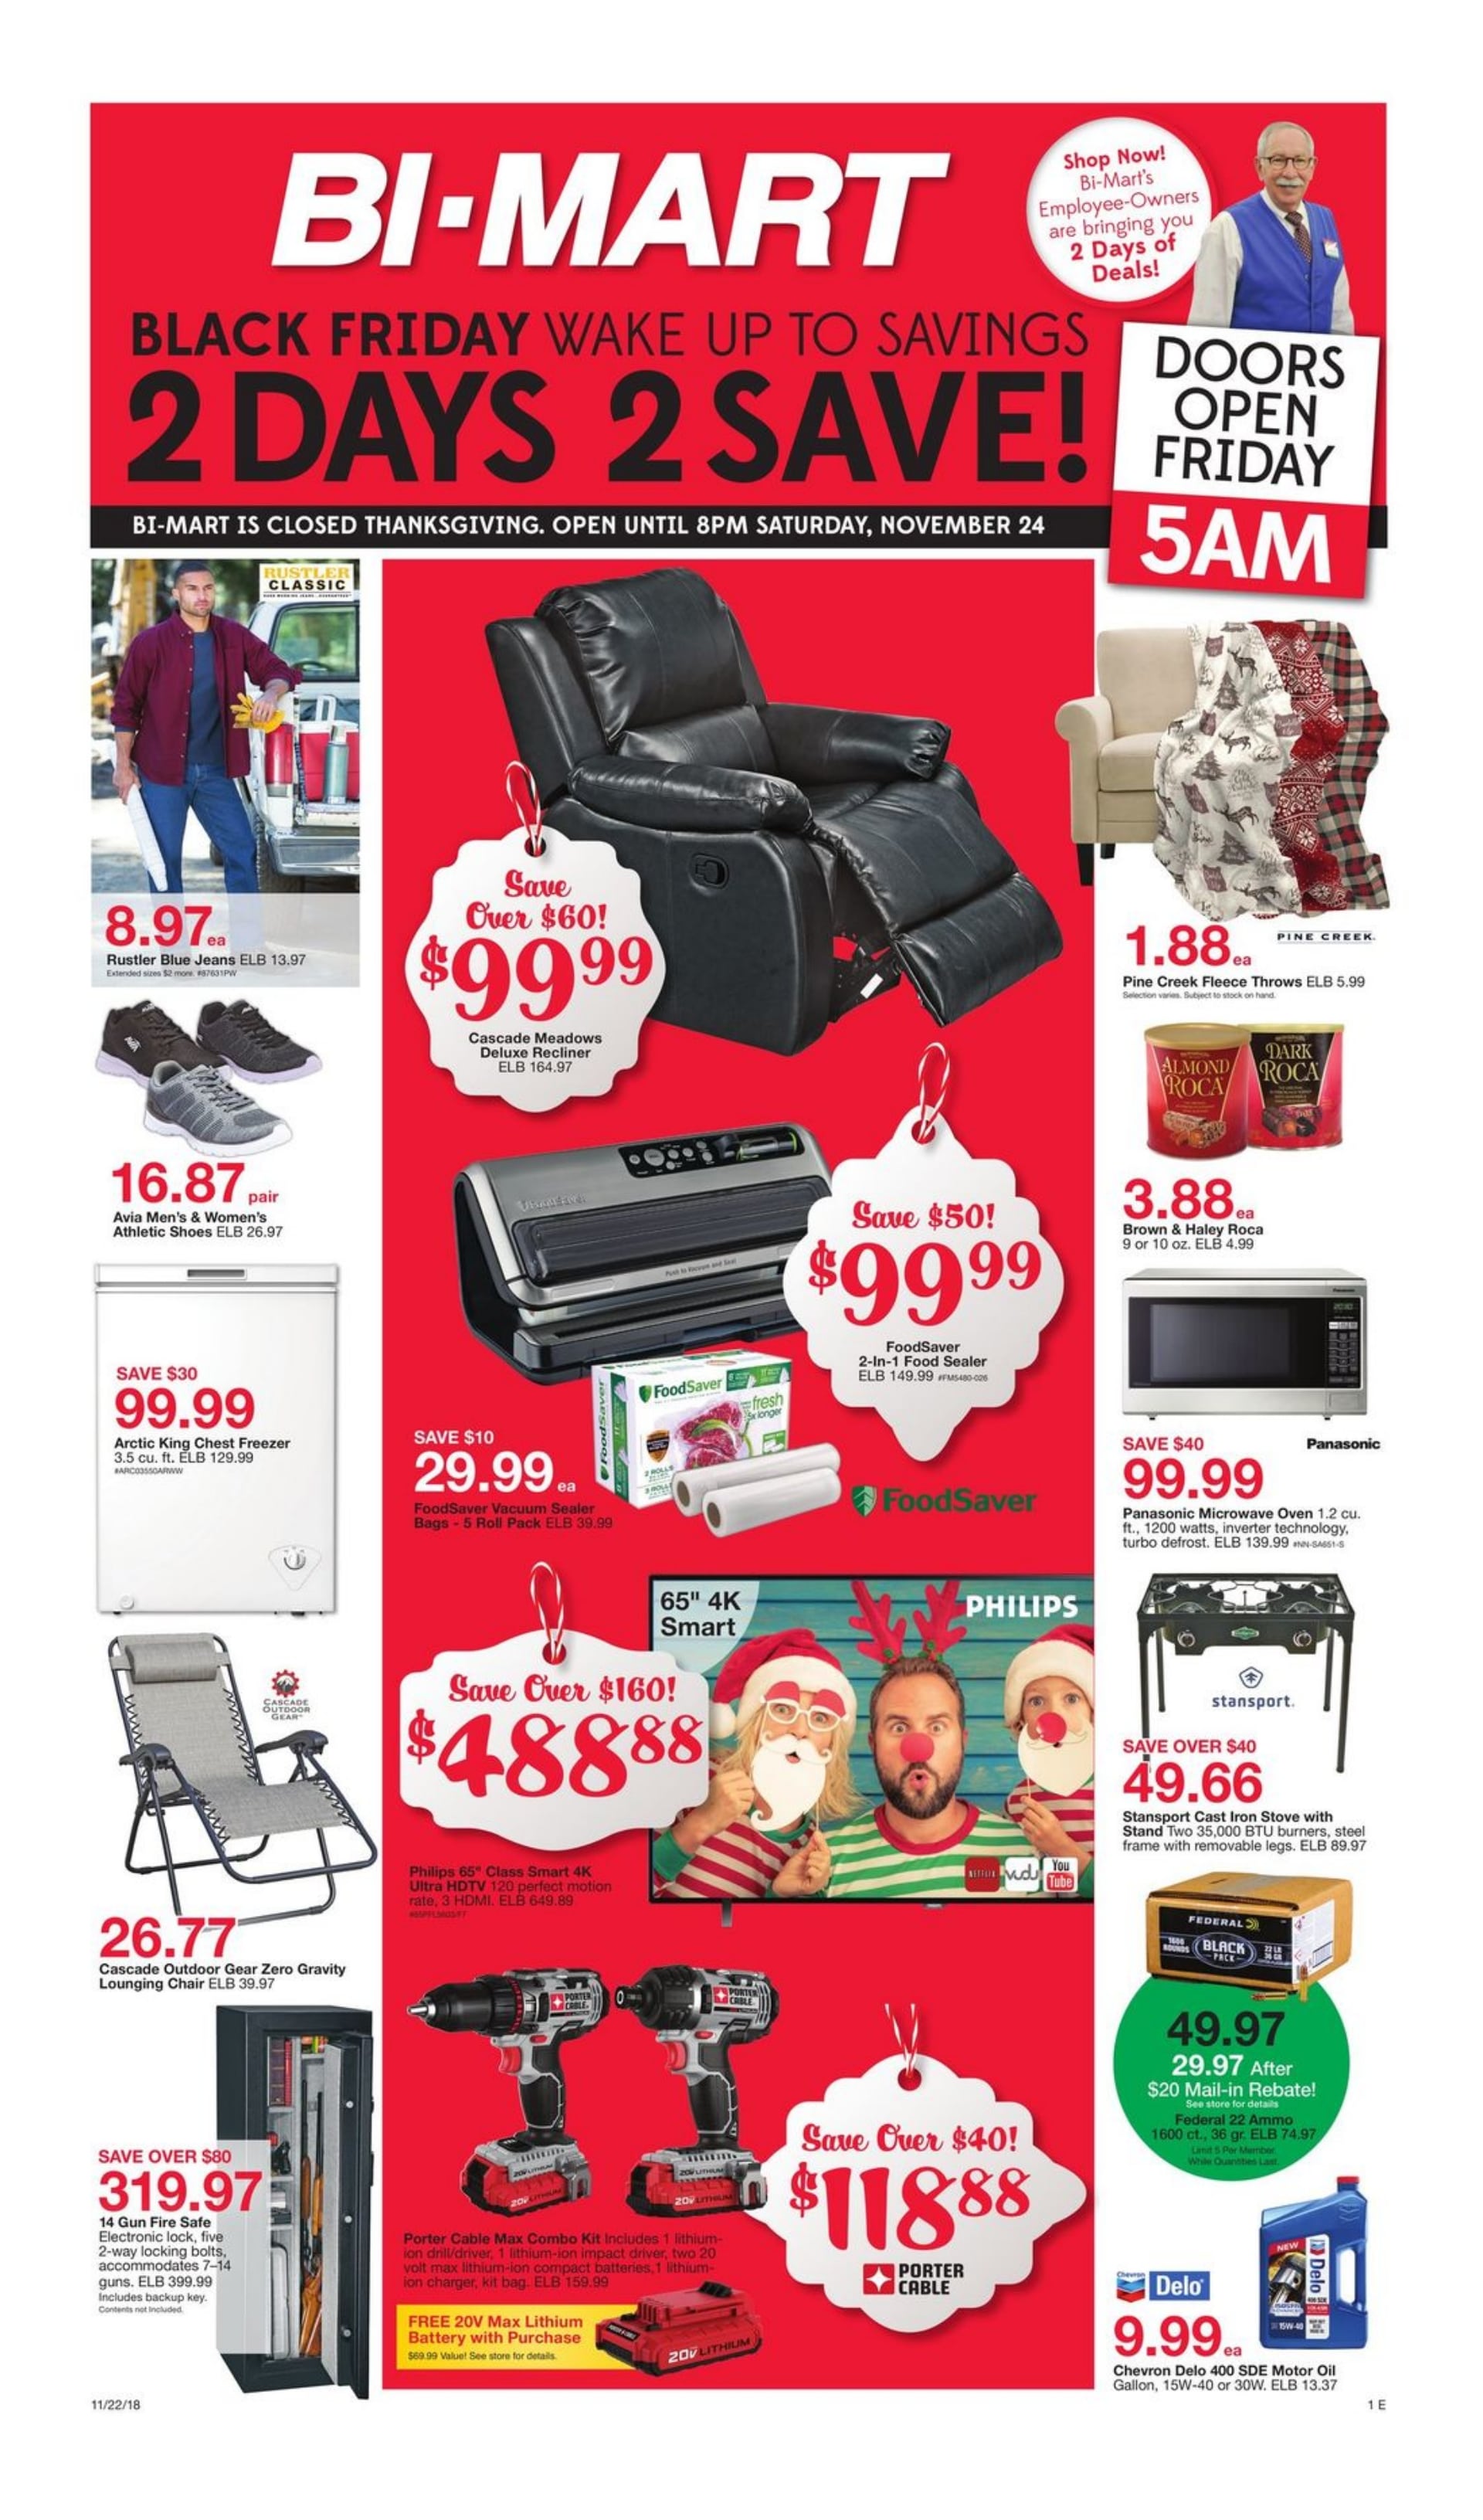 Bi-Mart Black Friday Ad 2018 - Where Have Motorcycle Gear Black Friday Deals